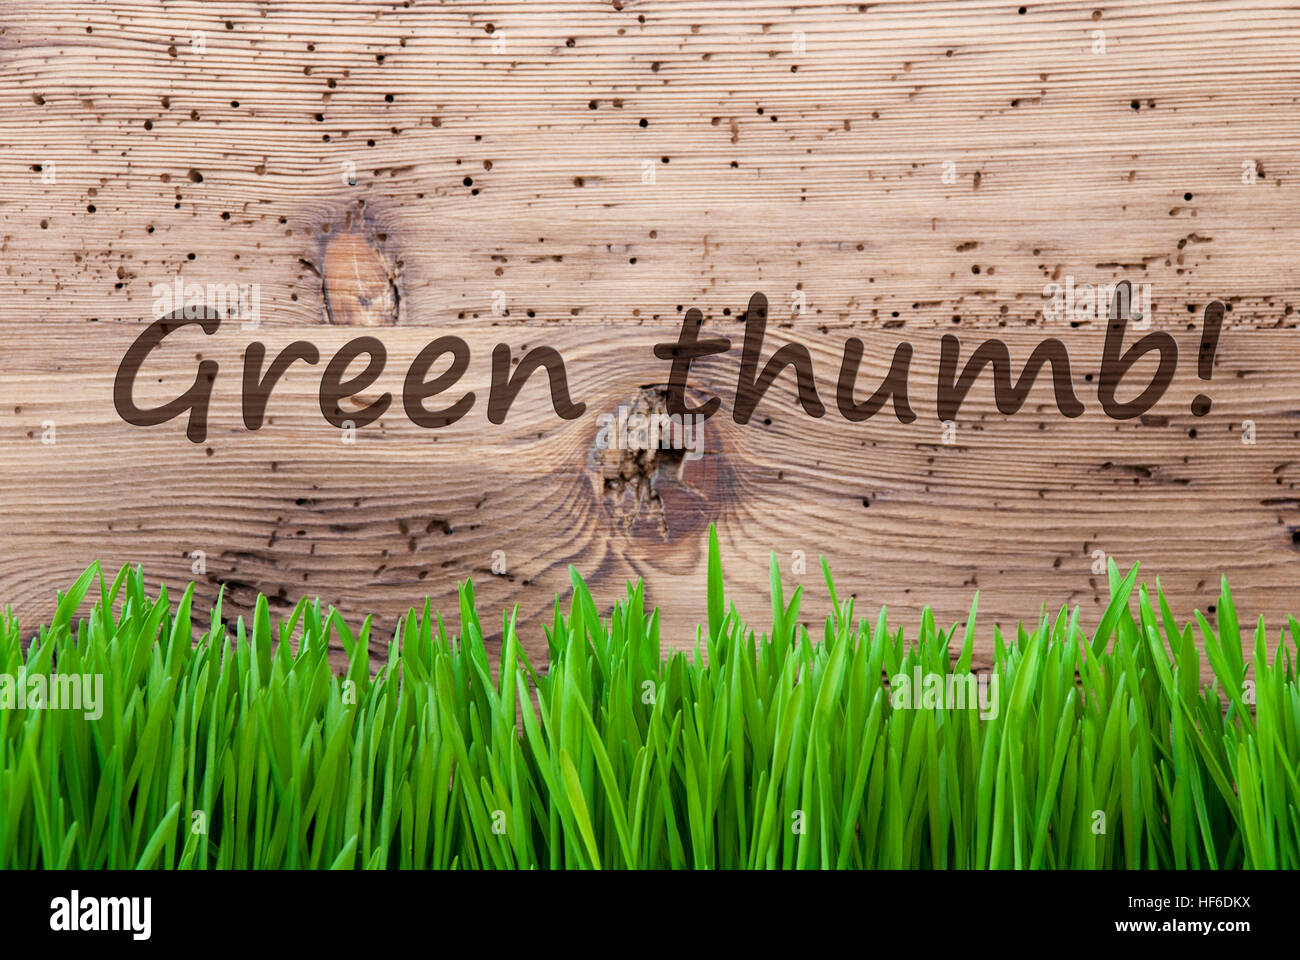 Bright Wooden Background, Gras, Text Green Thumb Stock Photo